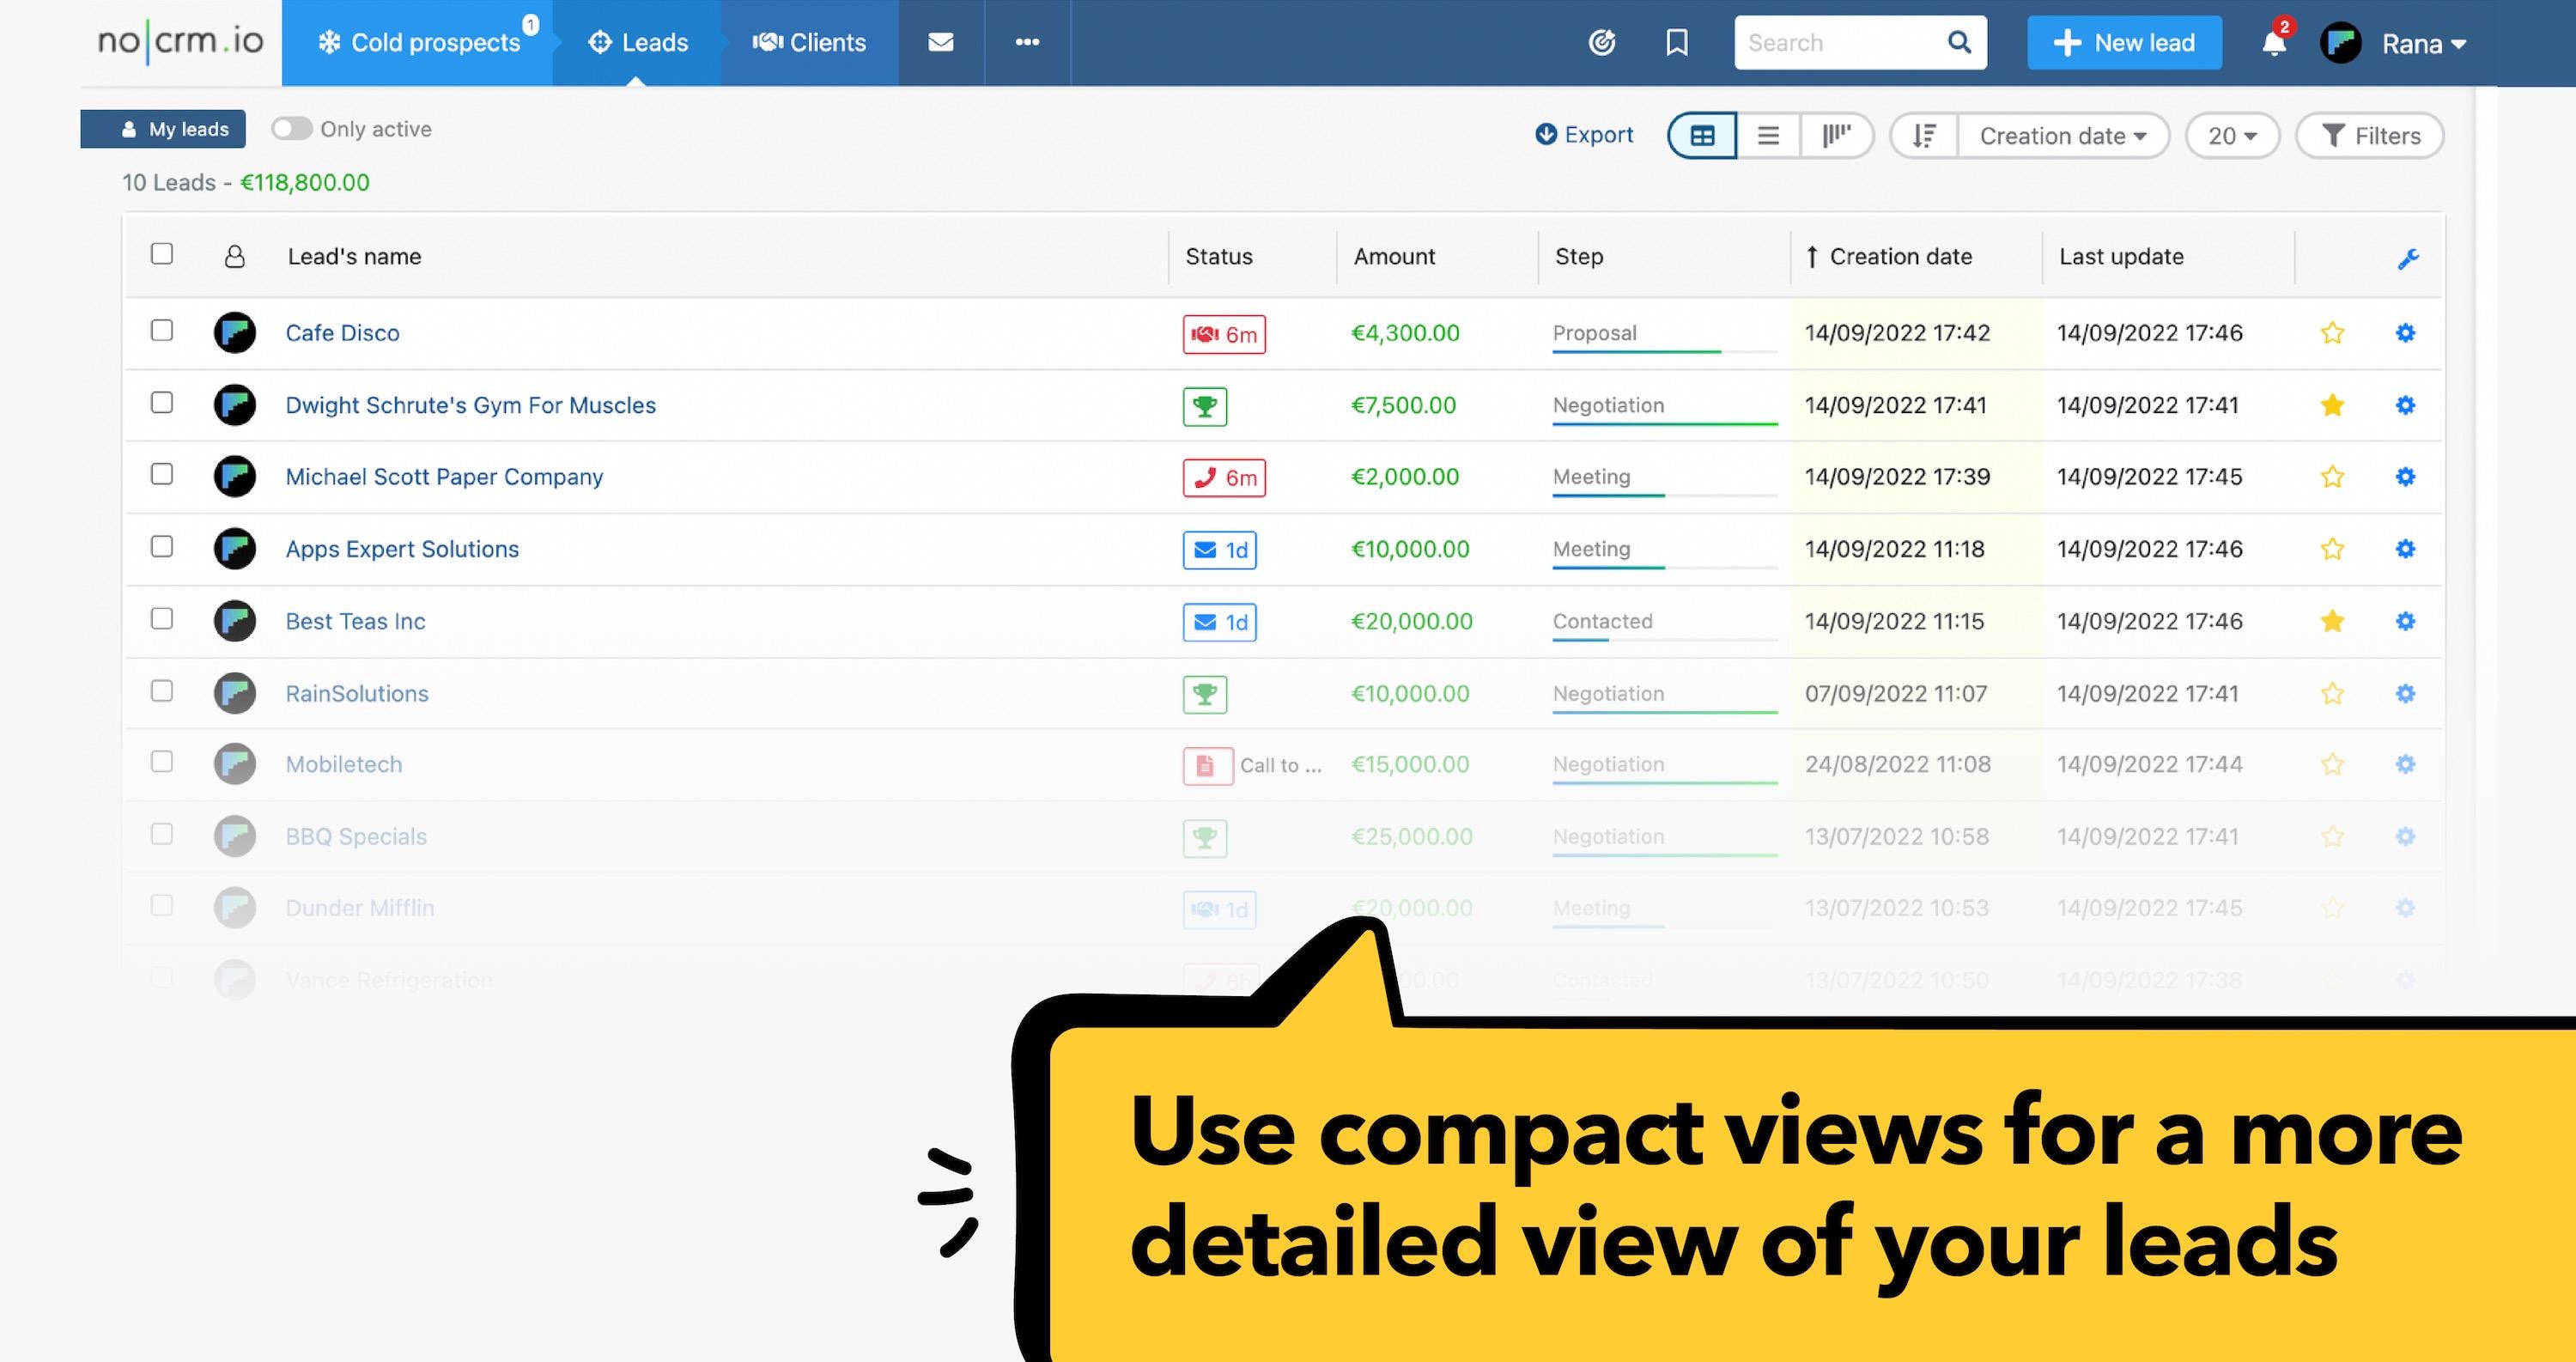 noCRM.io - Quickly view your leads' details and next actions to perform